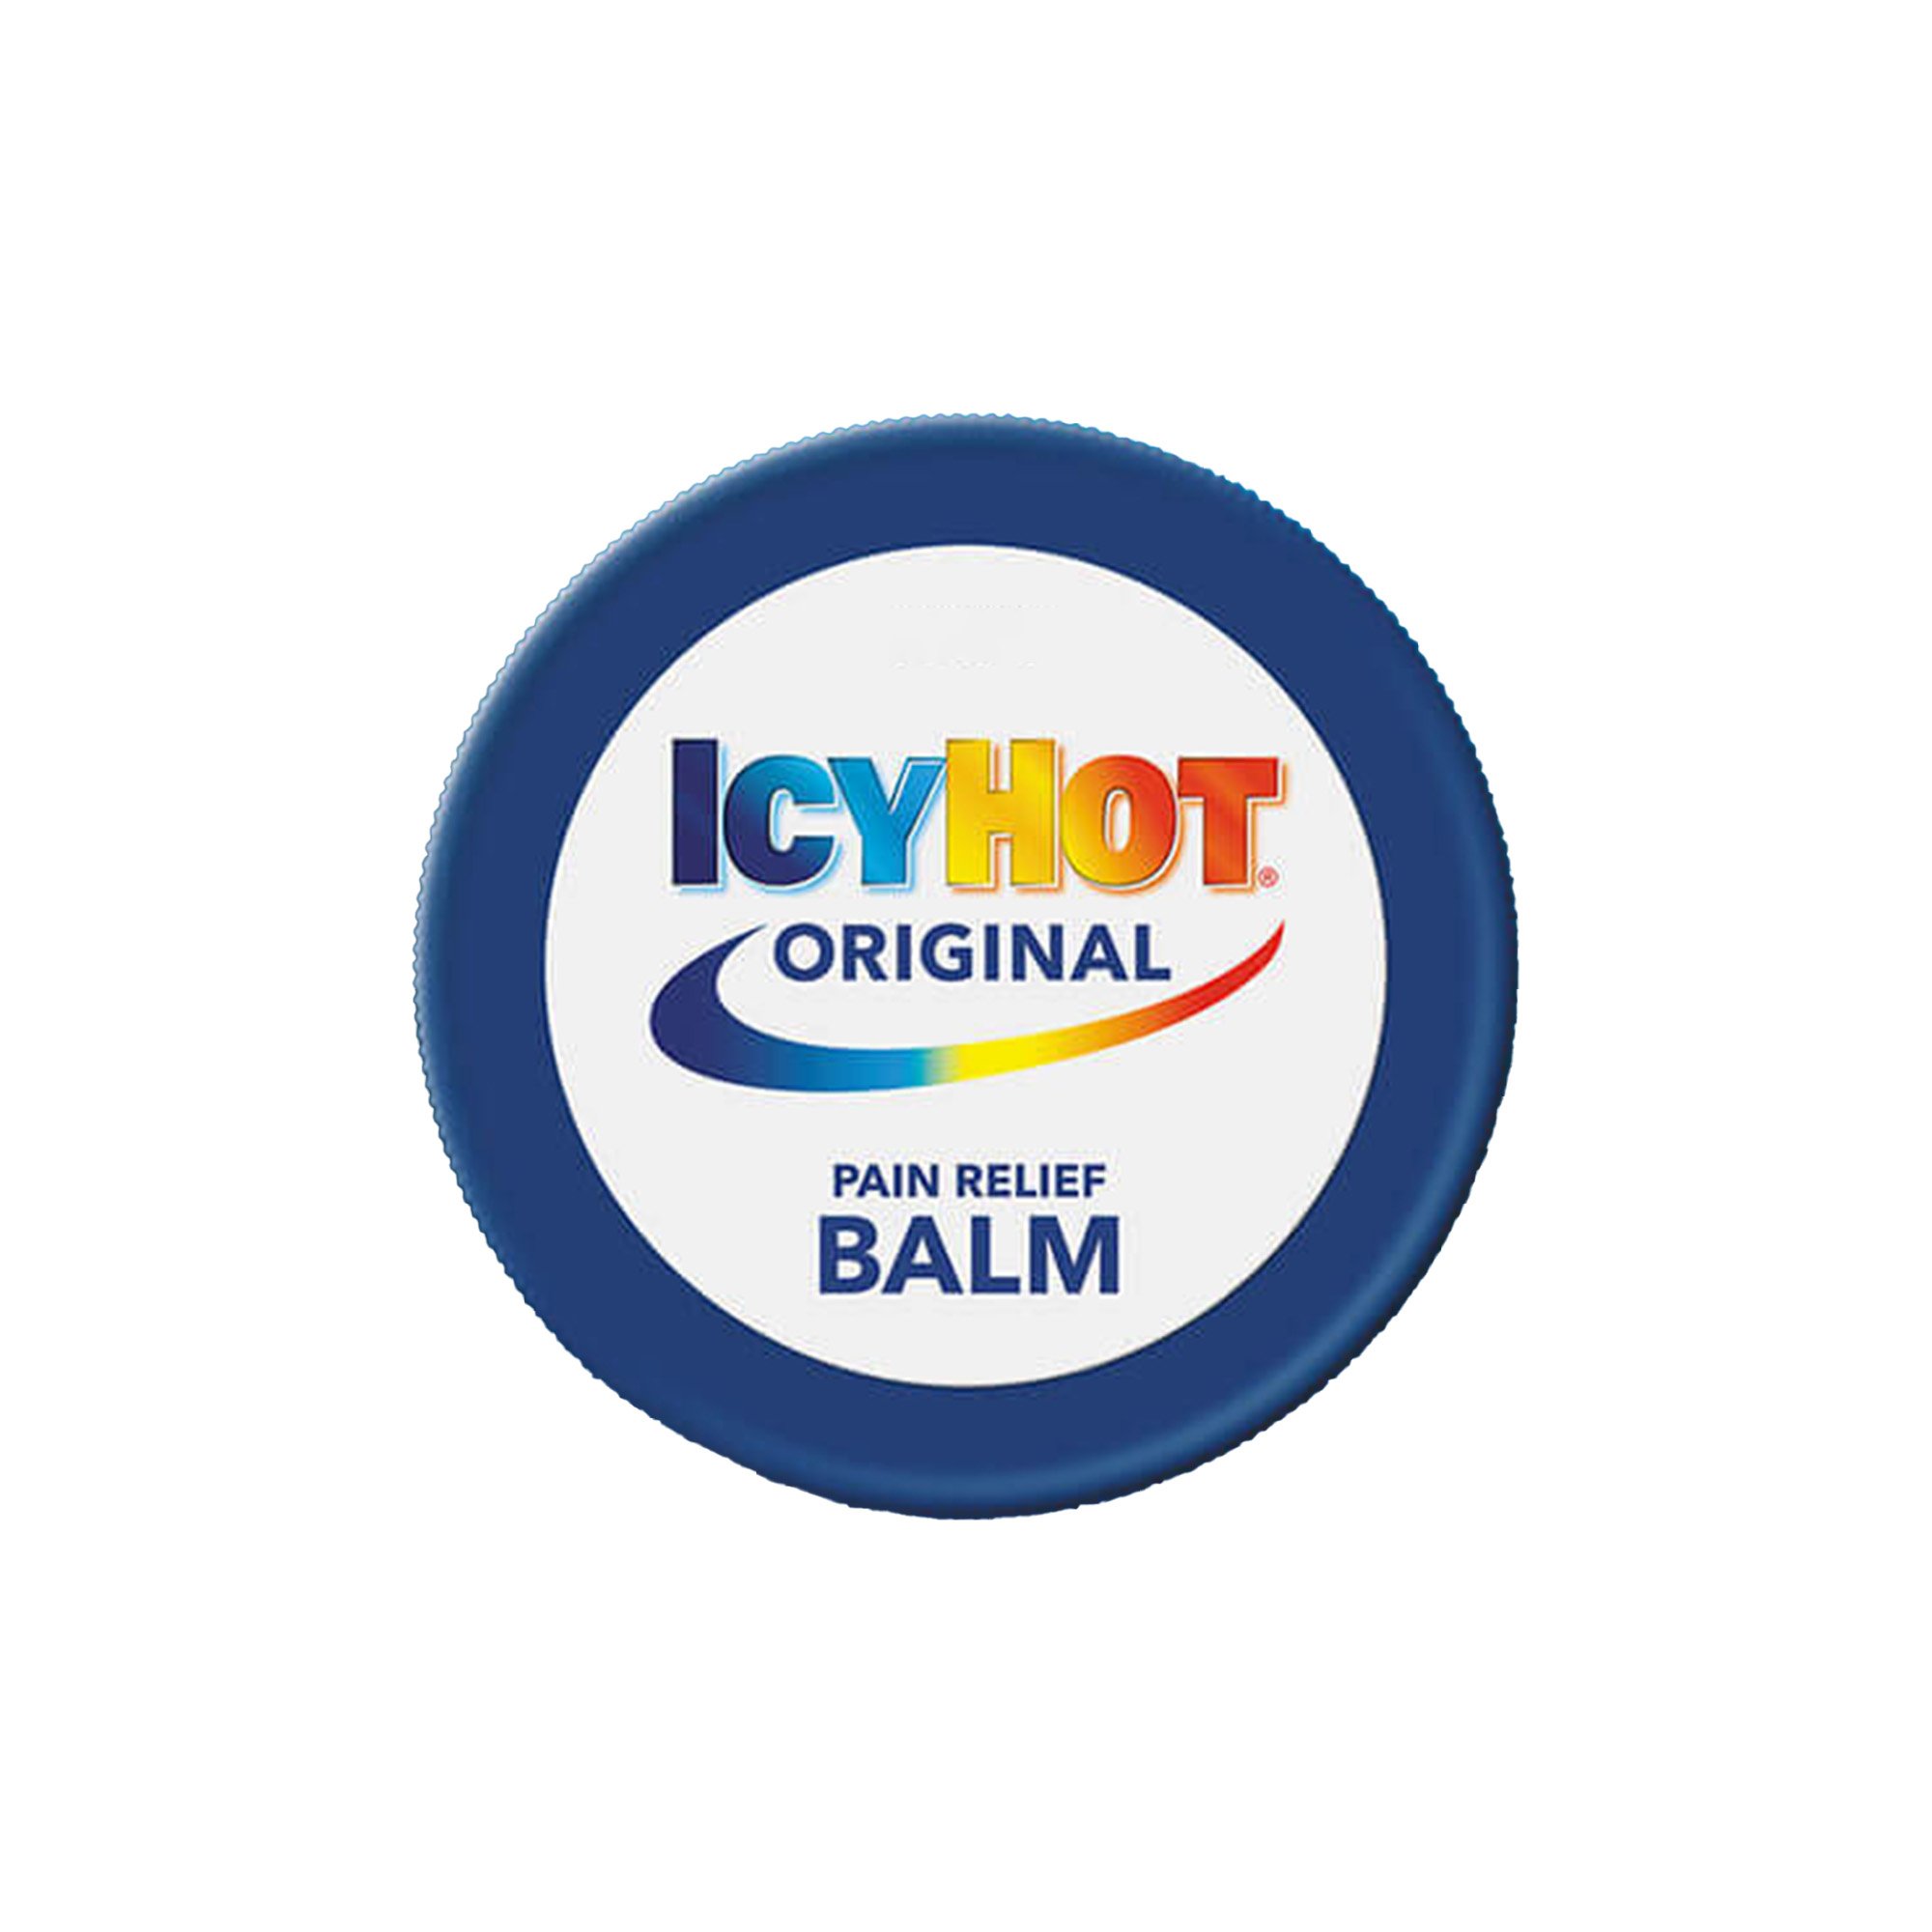 Icy Hot Original Extra Strength Topical Pain Reliever Balm and Numbing Muscle Rub Cream for Joint Pain Relief, 7.6% Menthol and 29% Methyl Salicylate, 3.5 oz - image 3 of 6